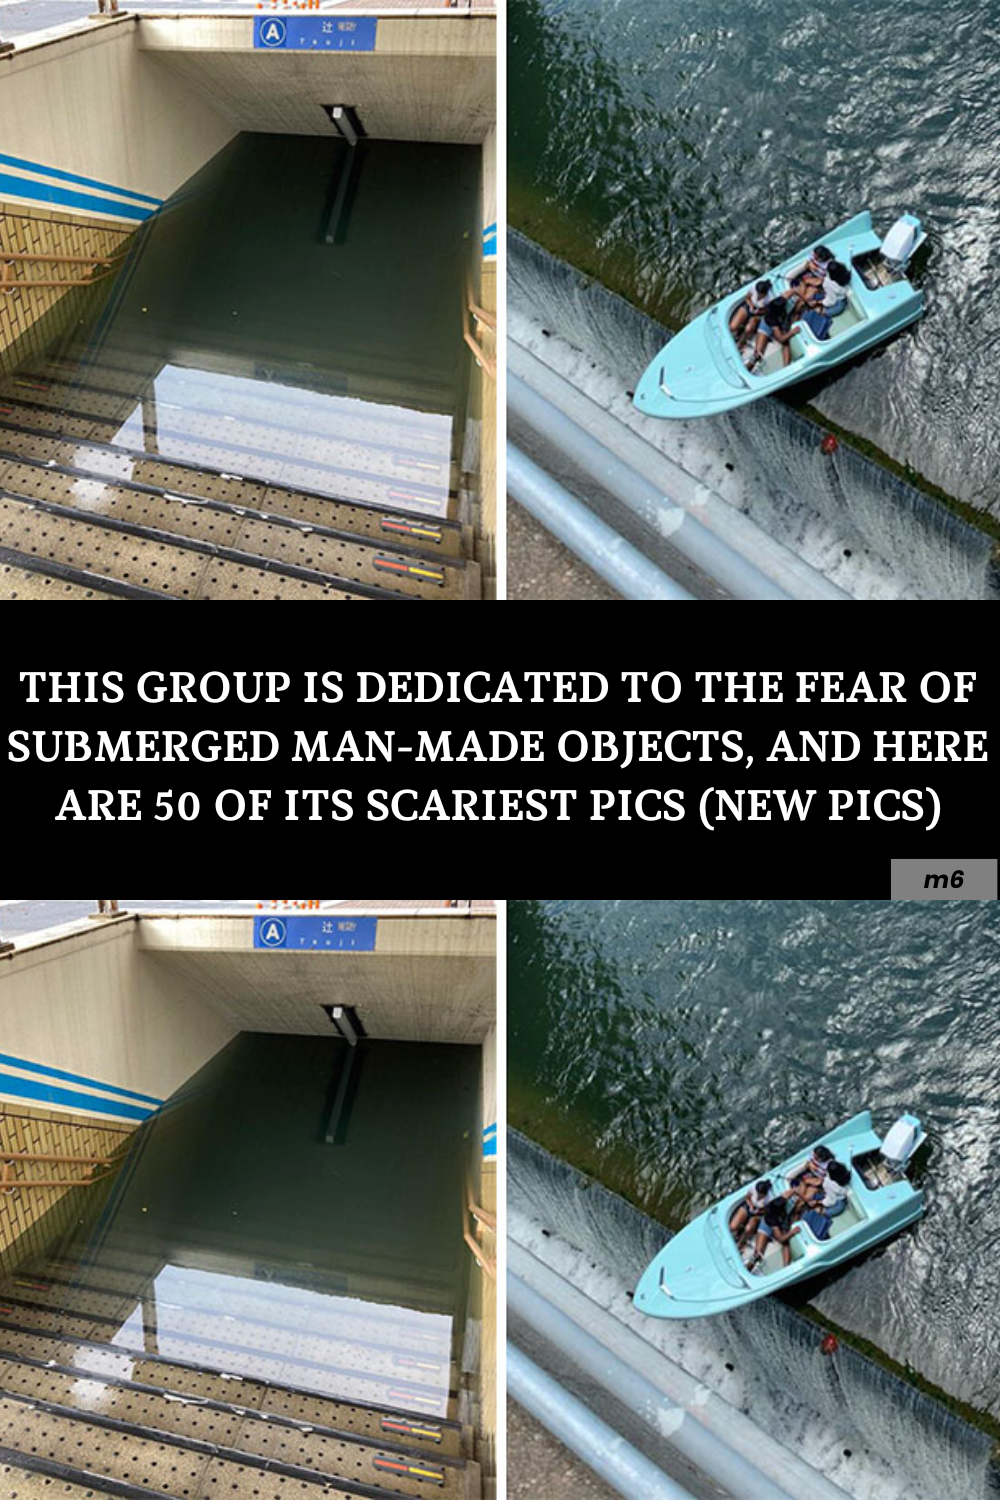 vThis Group Is Dedicated To The Fear Of Submerged Man-Made Objects, And Here Are 50 Of Its